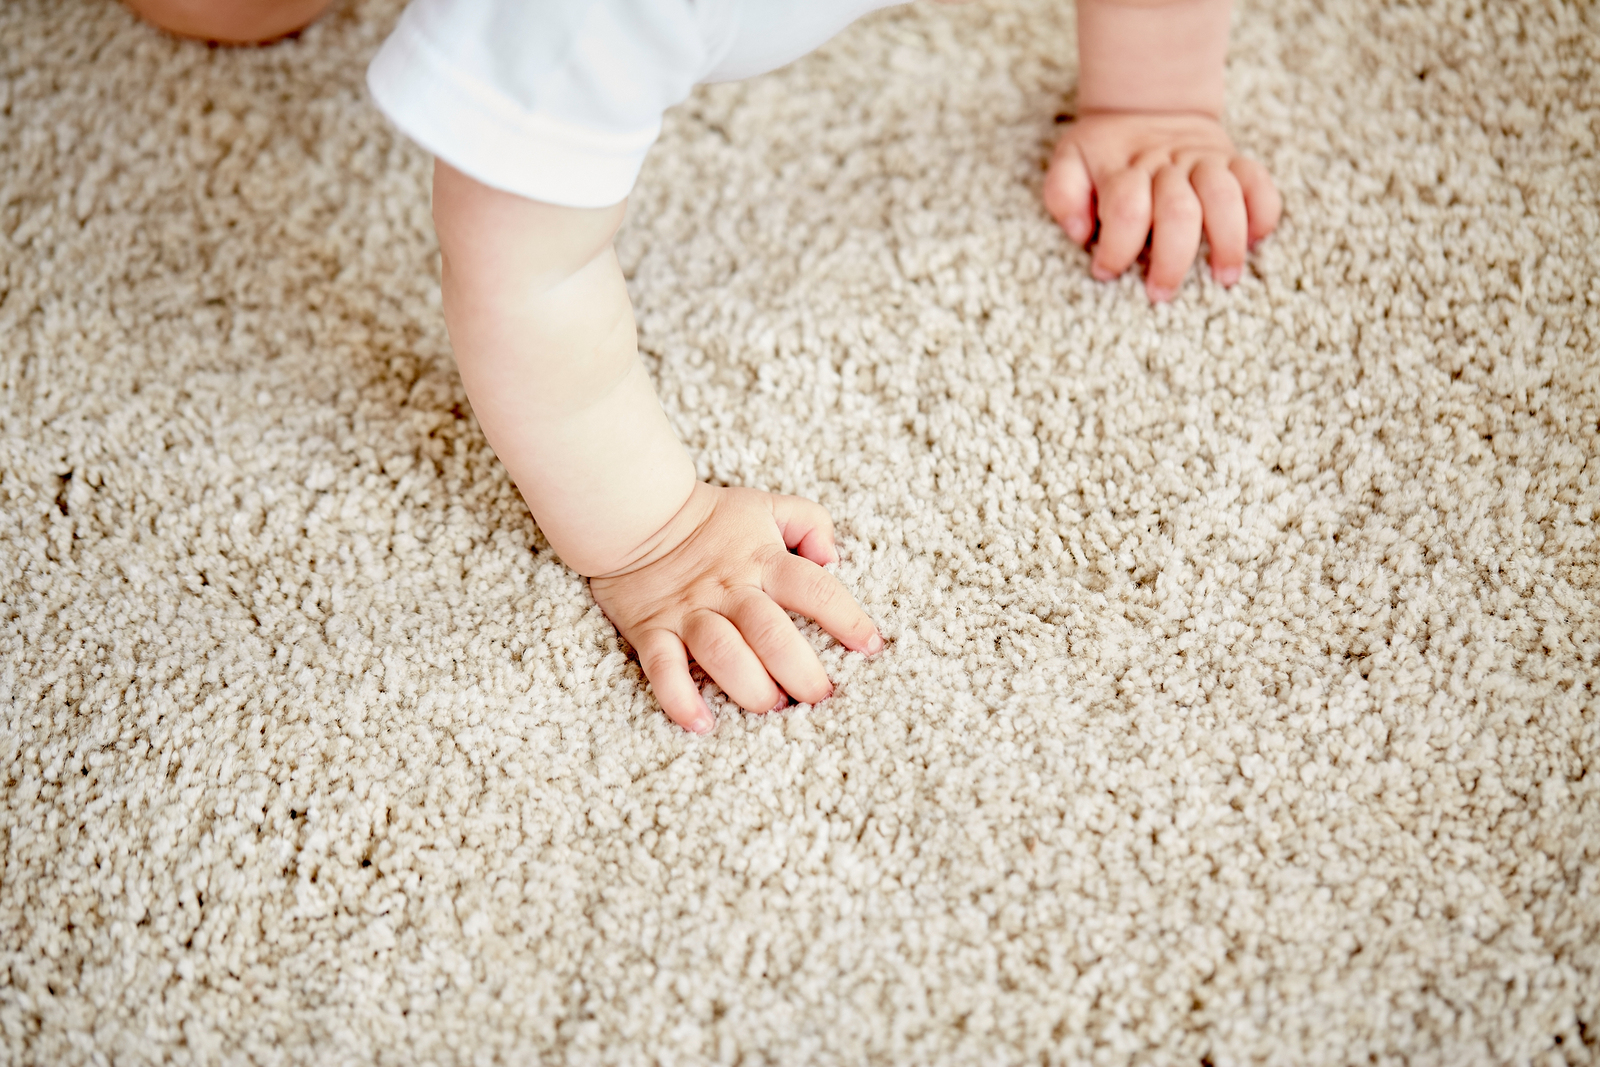 How Carpet Cleaning At Home and Office is better Health Sign?